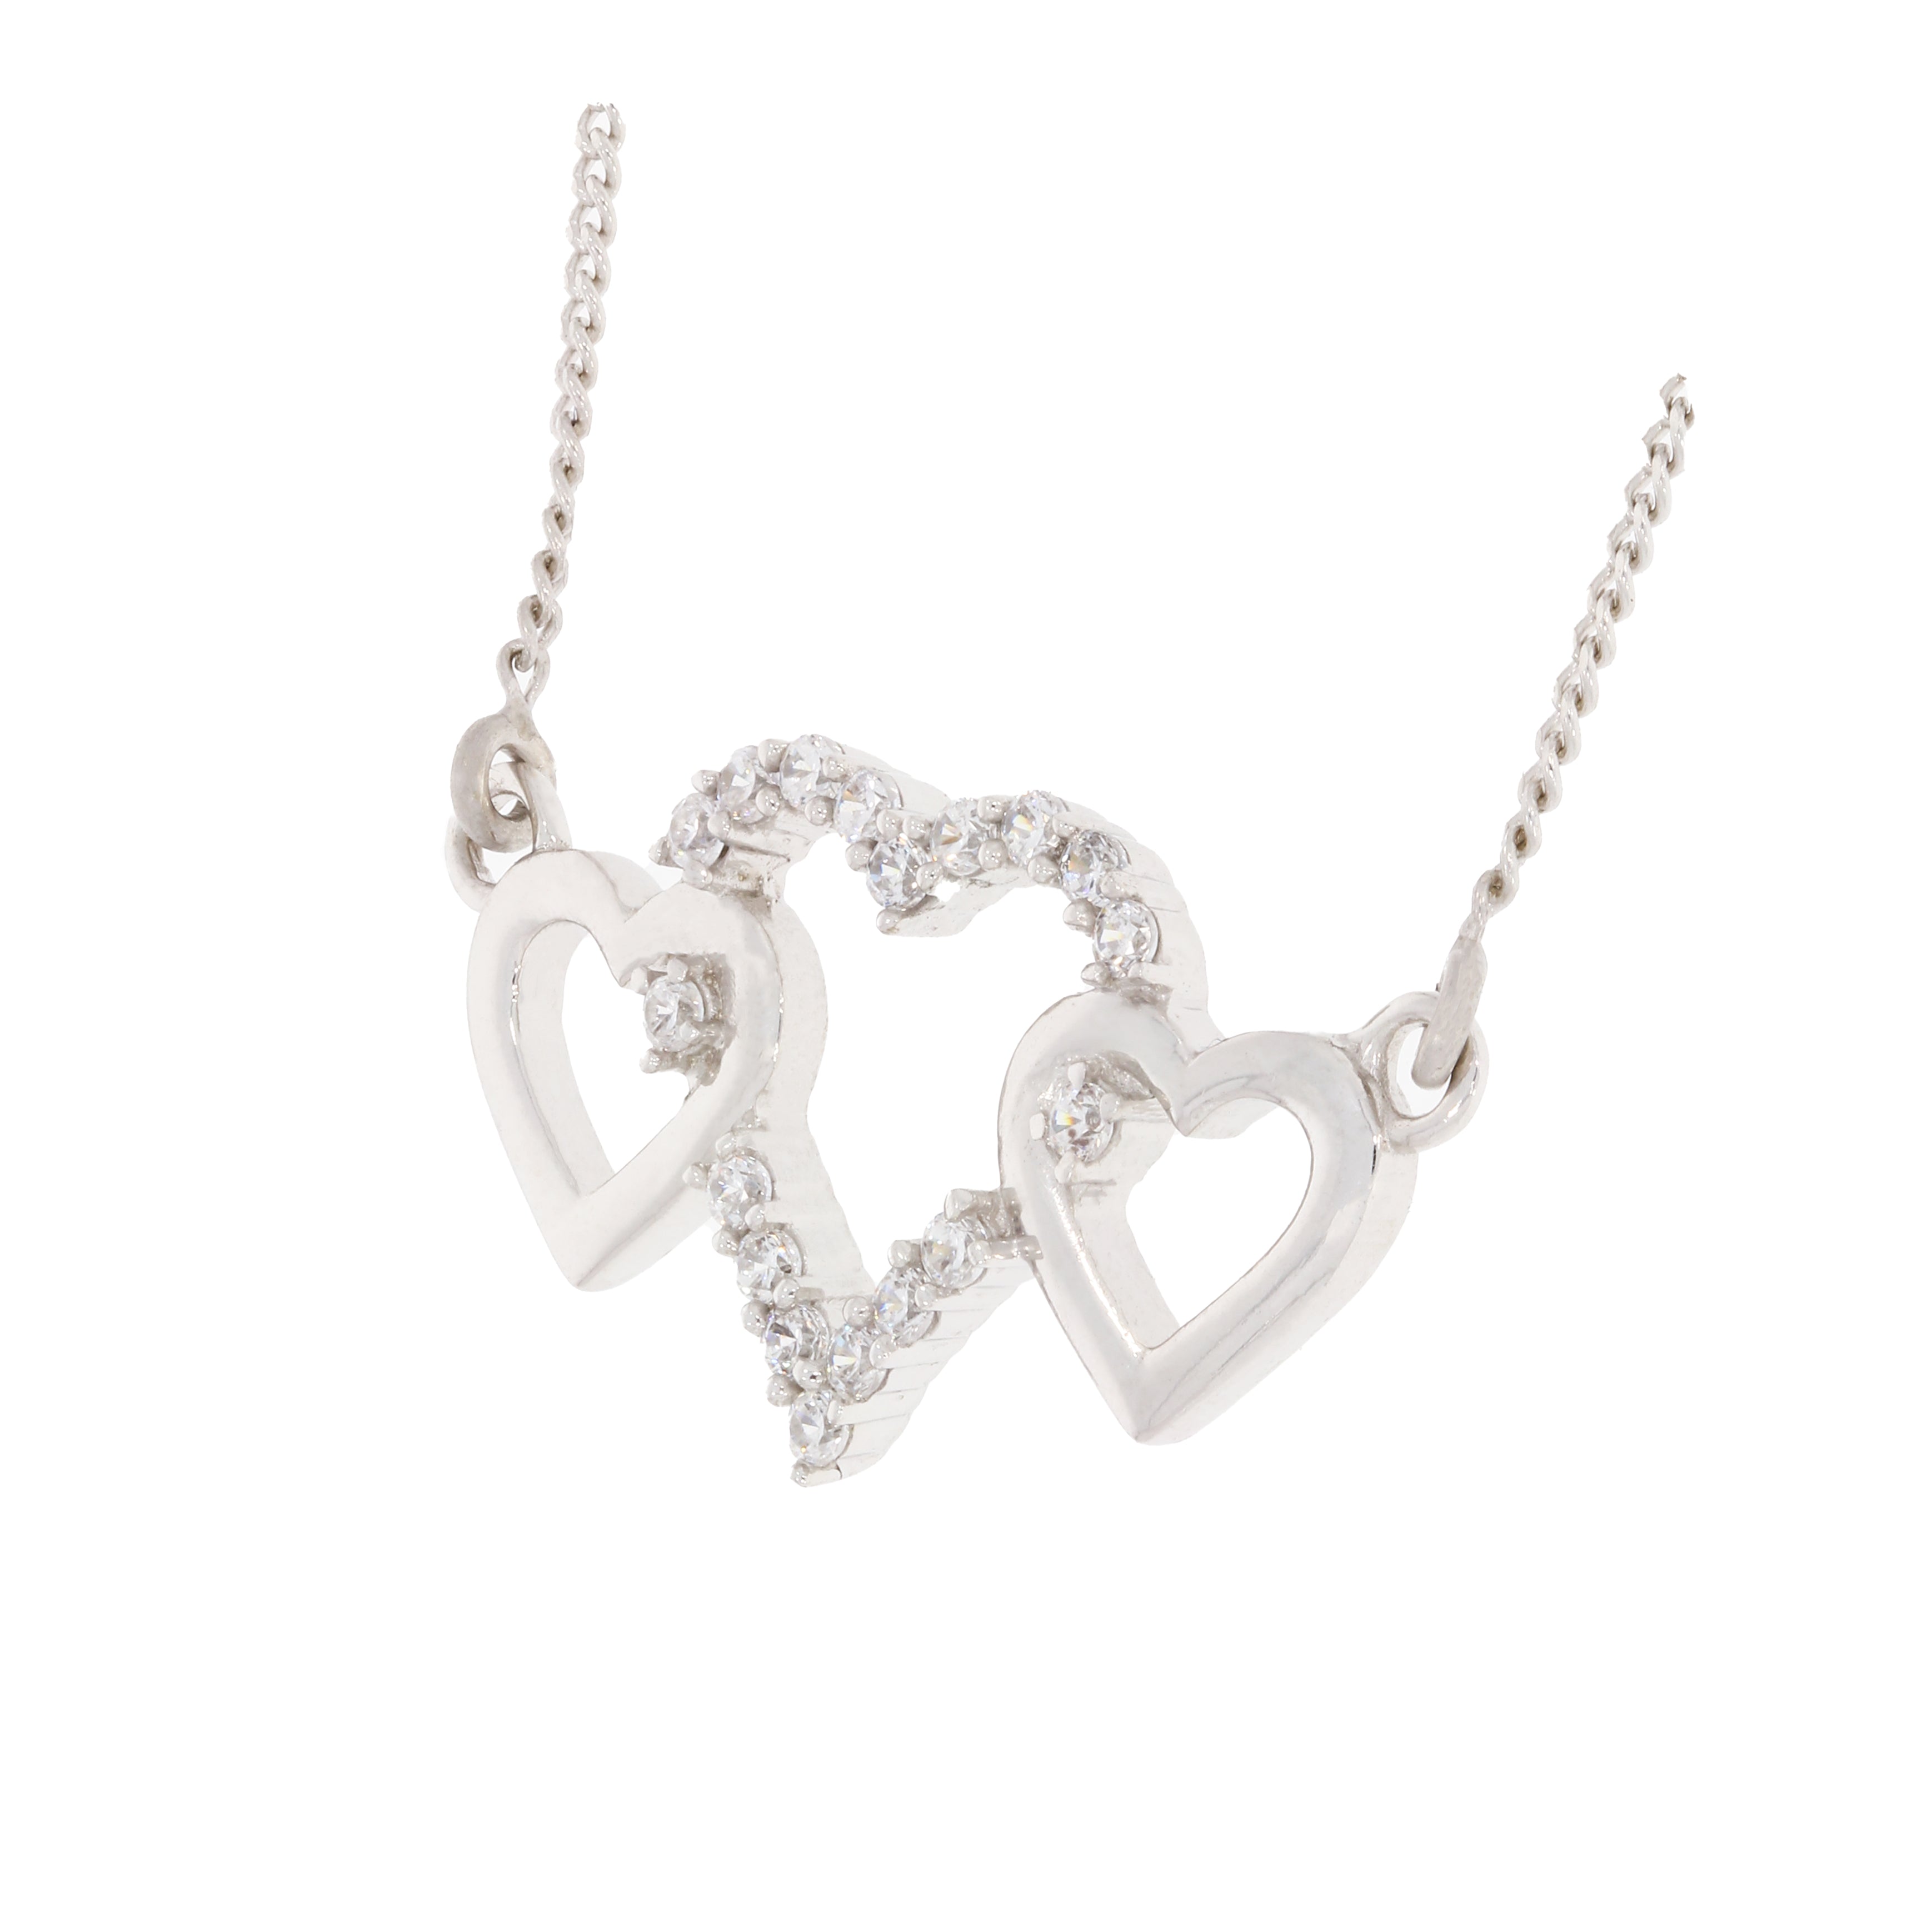 Silver Ornate Hearts Pendant with Link Chain